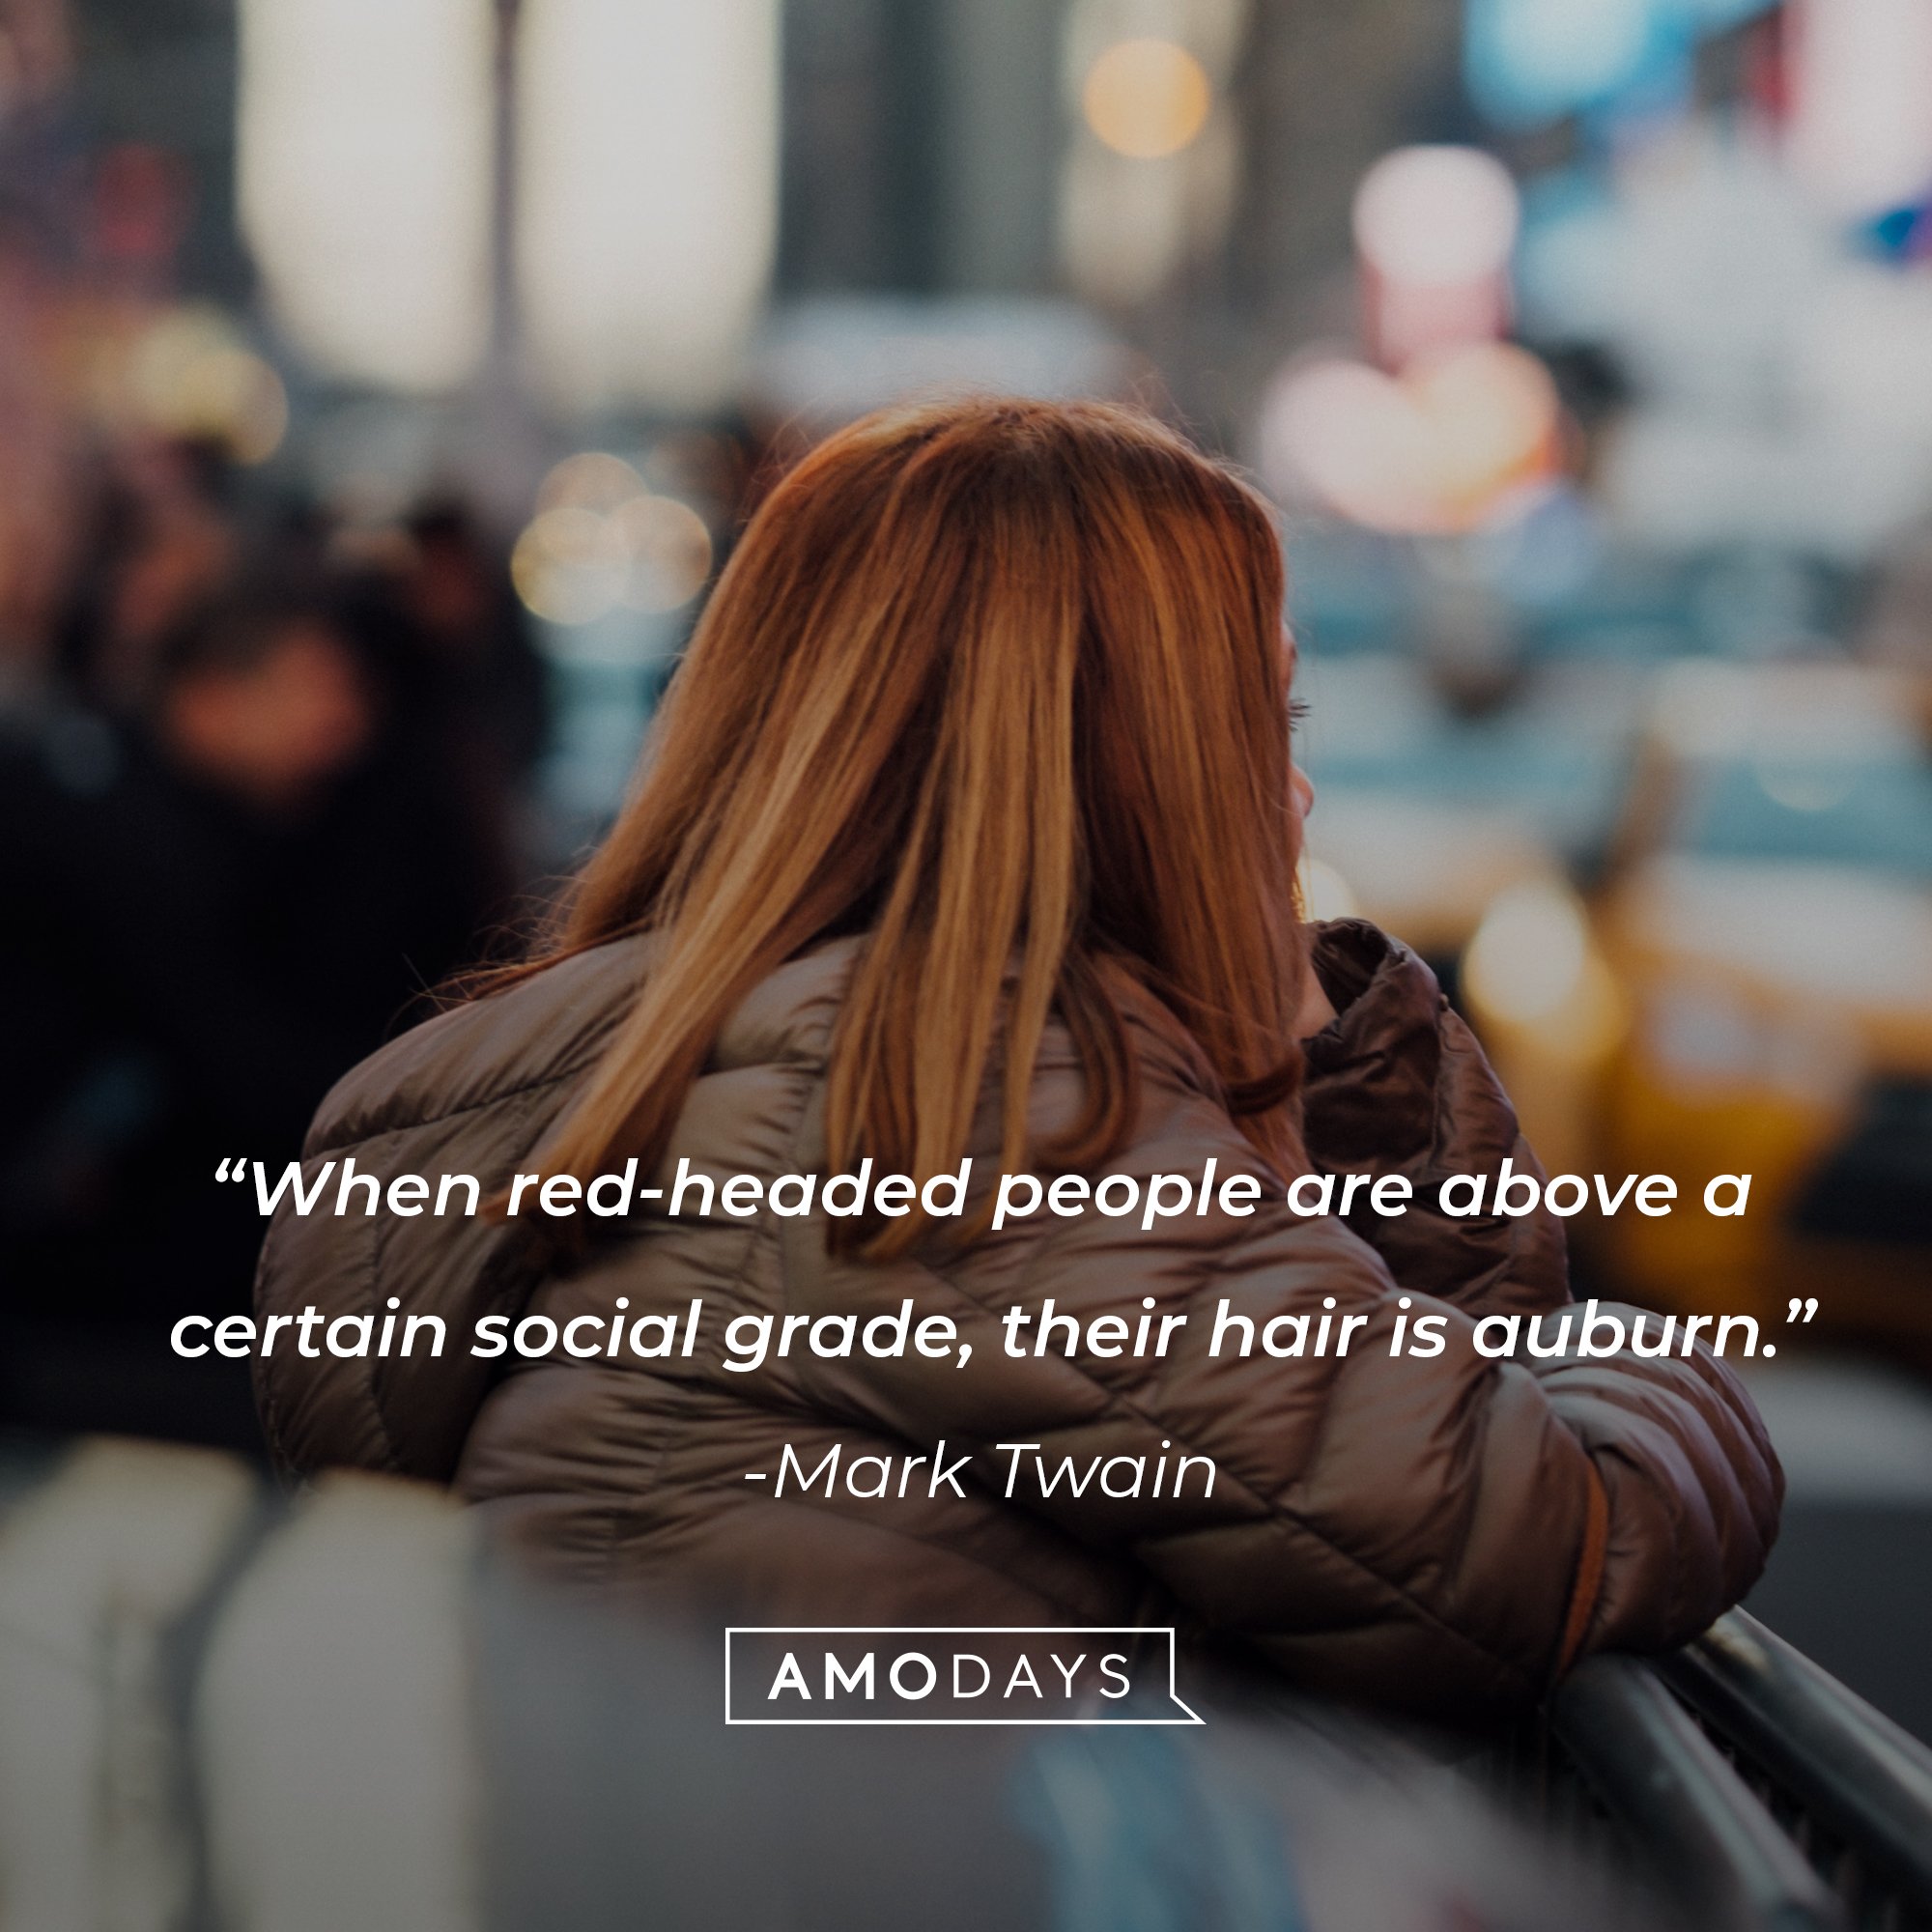 Mark Twain’s quote: “When red-headed people are above a certain social grade, their hair is auburn.” | Image: AmoDays